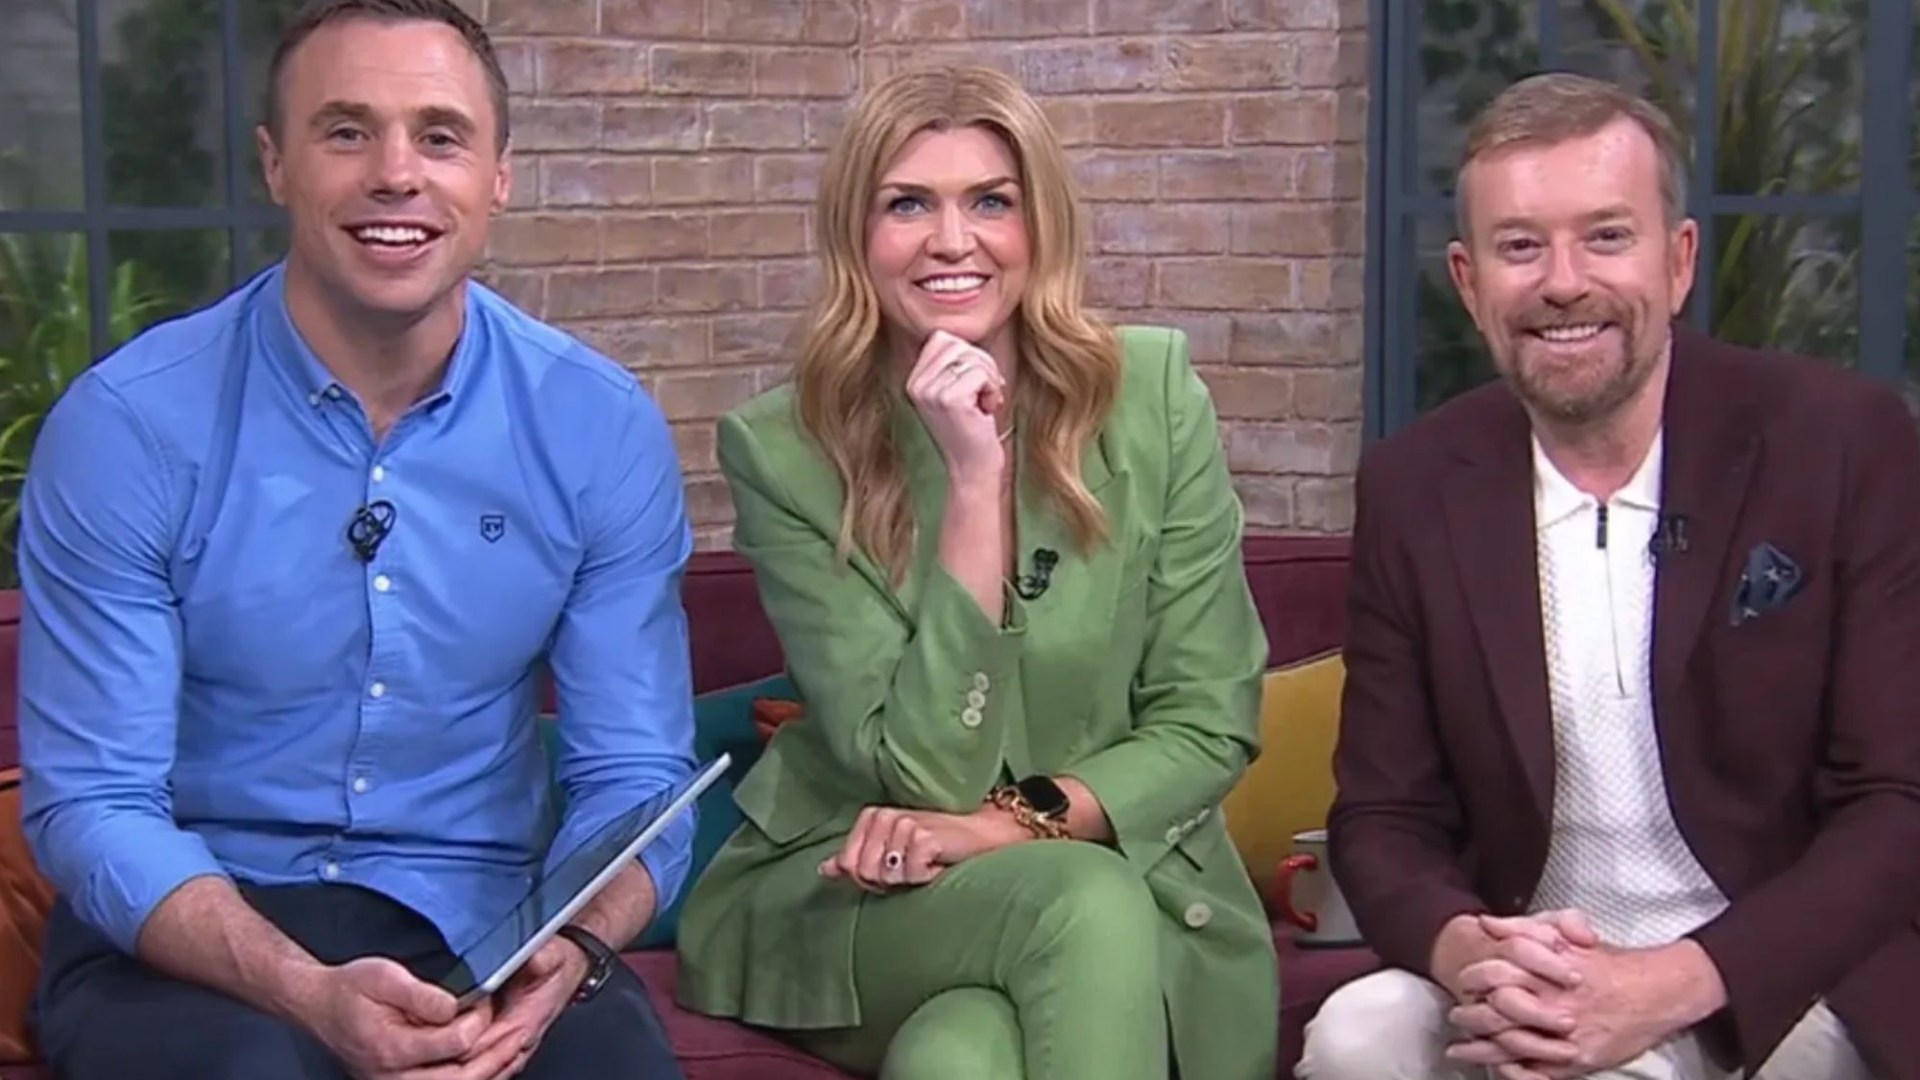 Ireland AM star strips down for on air transformation as baffled Tommy Bowe says ‘this is the oddest thing I’ve seen’ [Video]